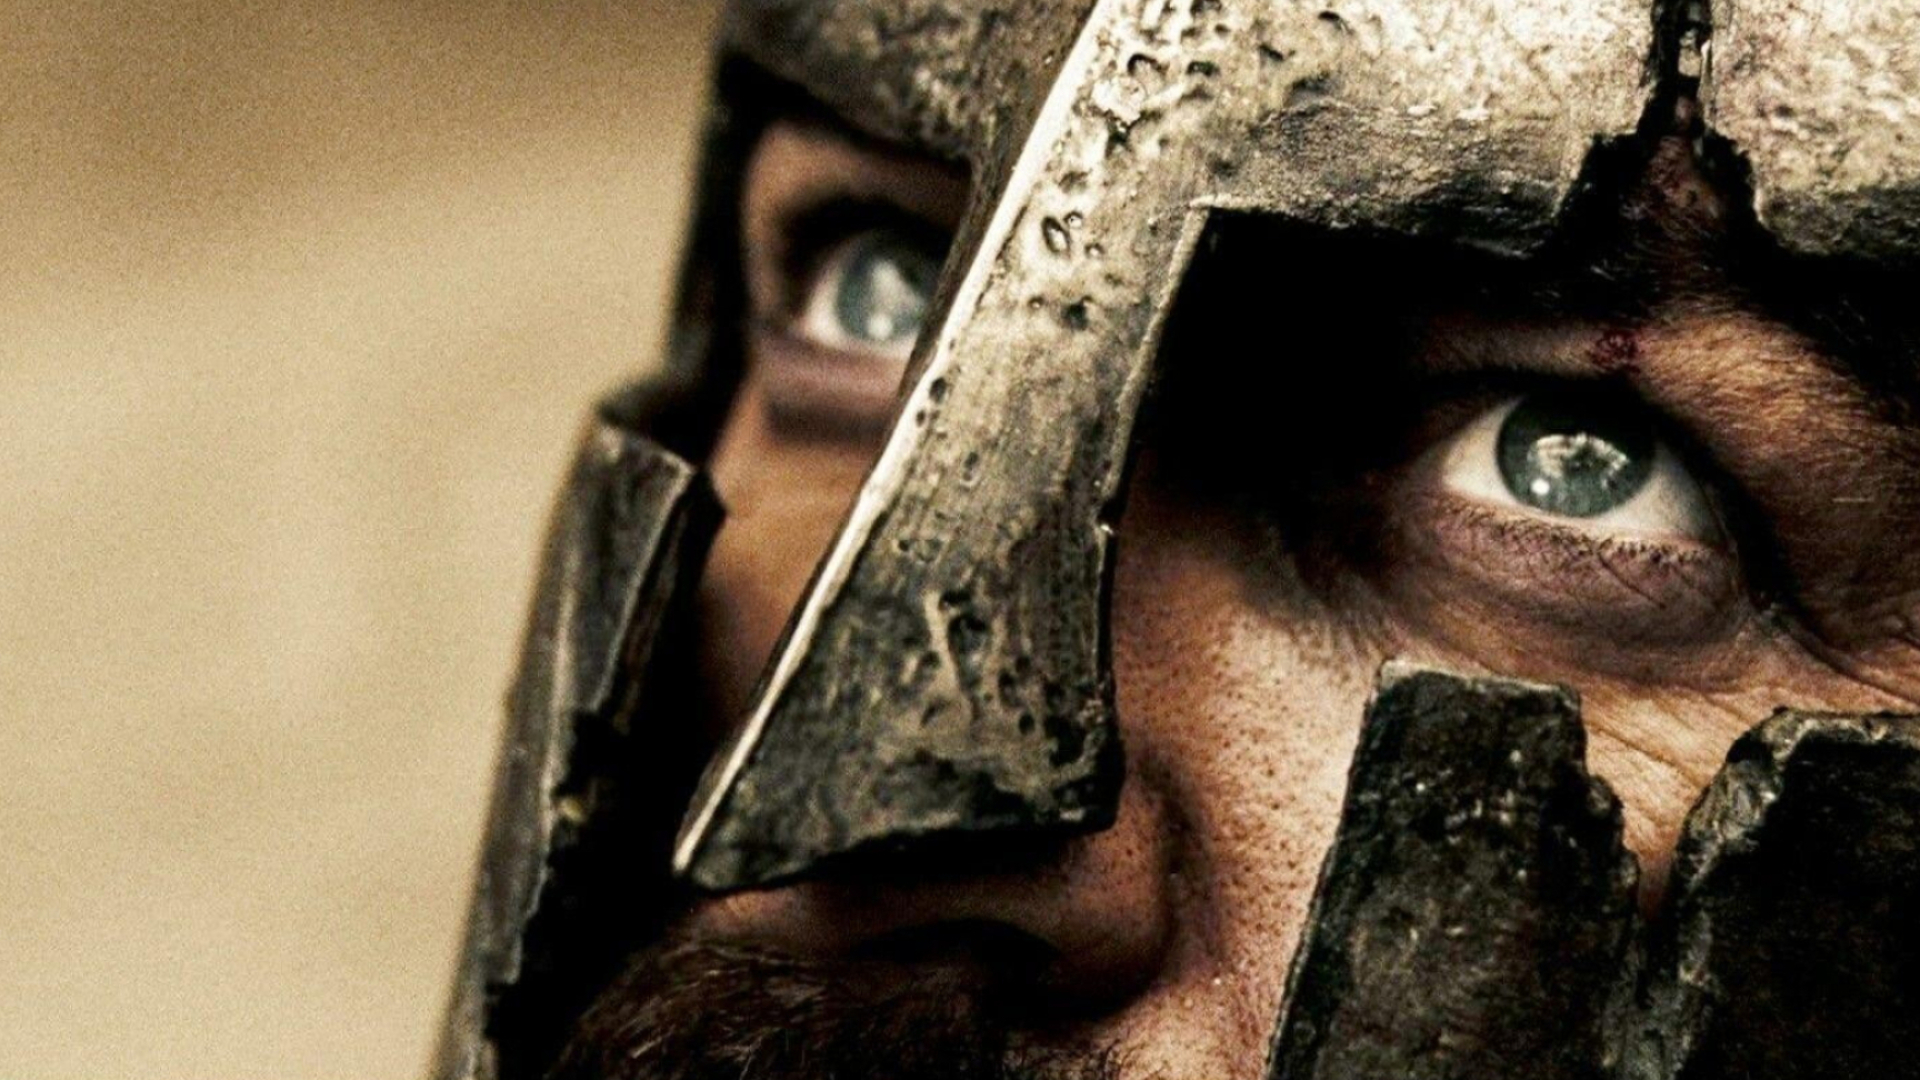 Sparta: Gerard Butler as King Leonidas before the final battle at Thermopylae, 300, A historical action movie, Agoge system, Spartan Helmet. 1920x1080 Full HD Background.